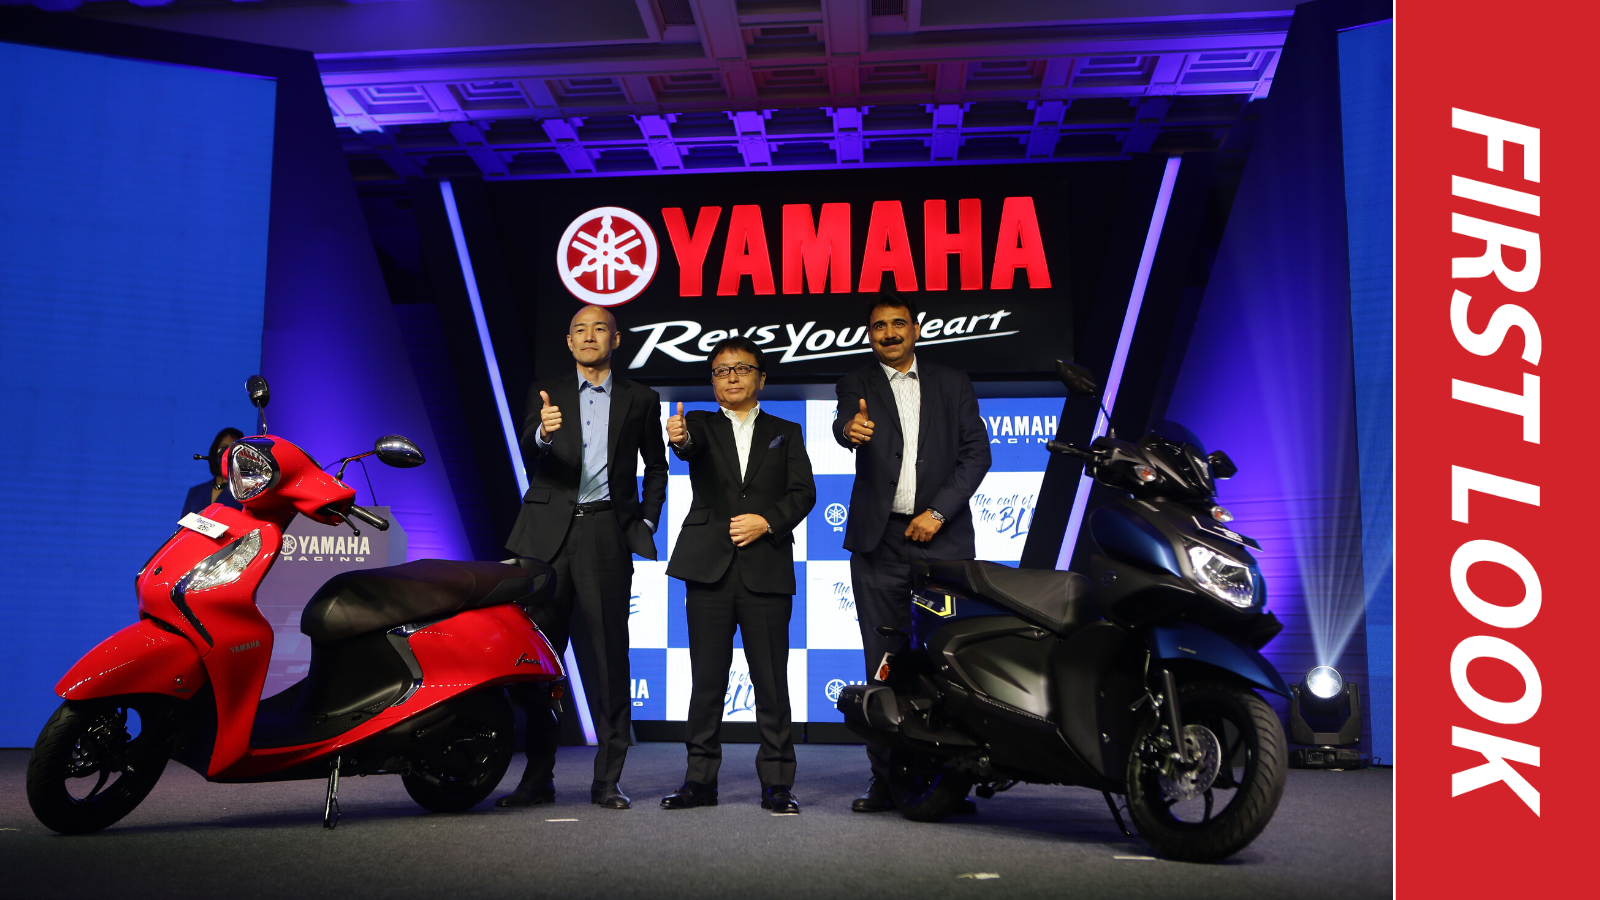 2020 Yamaha Fascino Launched Rayzr Mt 15 And Yzf R15 Showcased